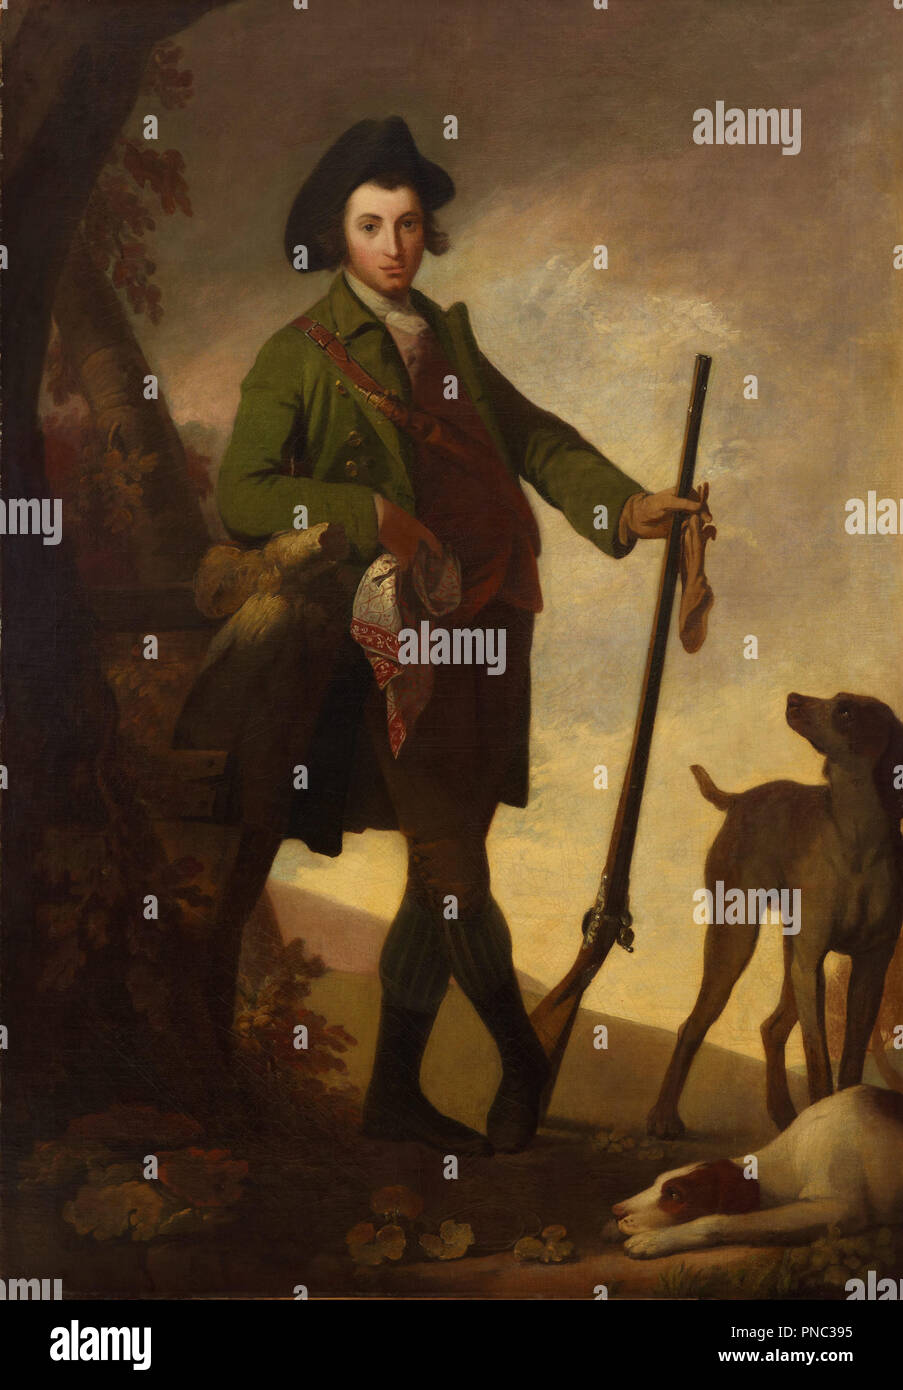 The young sportsman. Date/Period: 1766. Painting. Oil on canvas. Height: 2,273 mm (89.48 in); Width: 1,630 mm (64.17 in). Author: Robert Pine. ROBERT EDGE PINE. Stock Photo